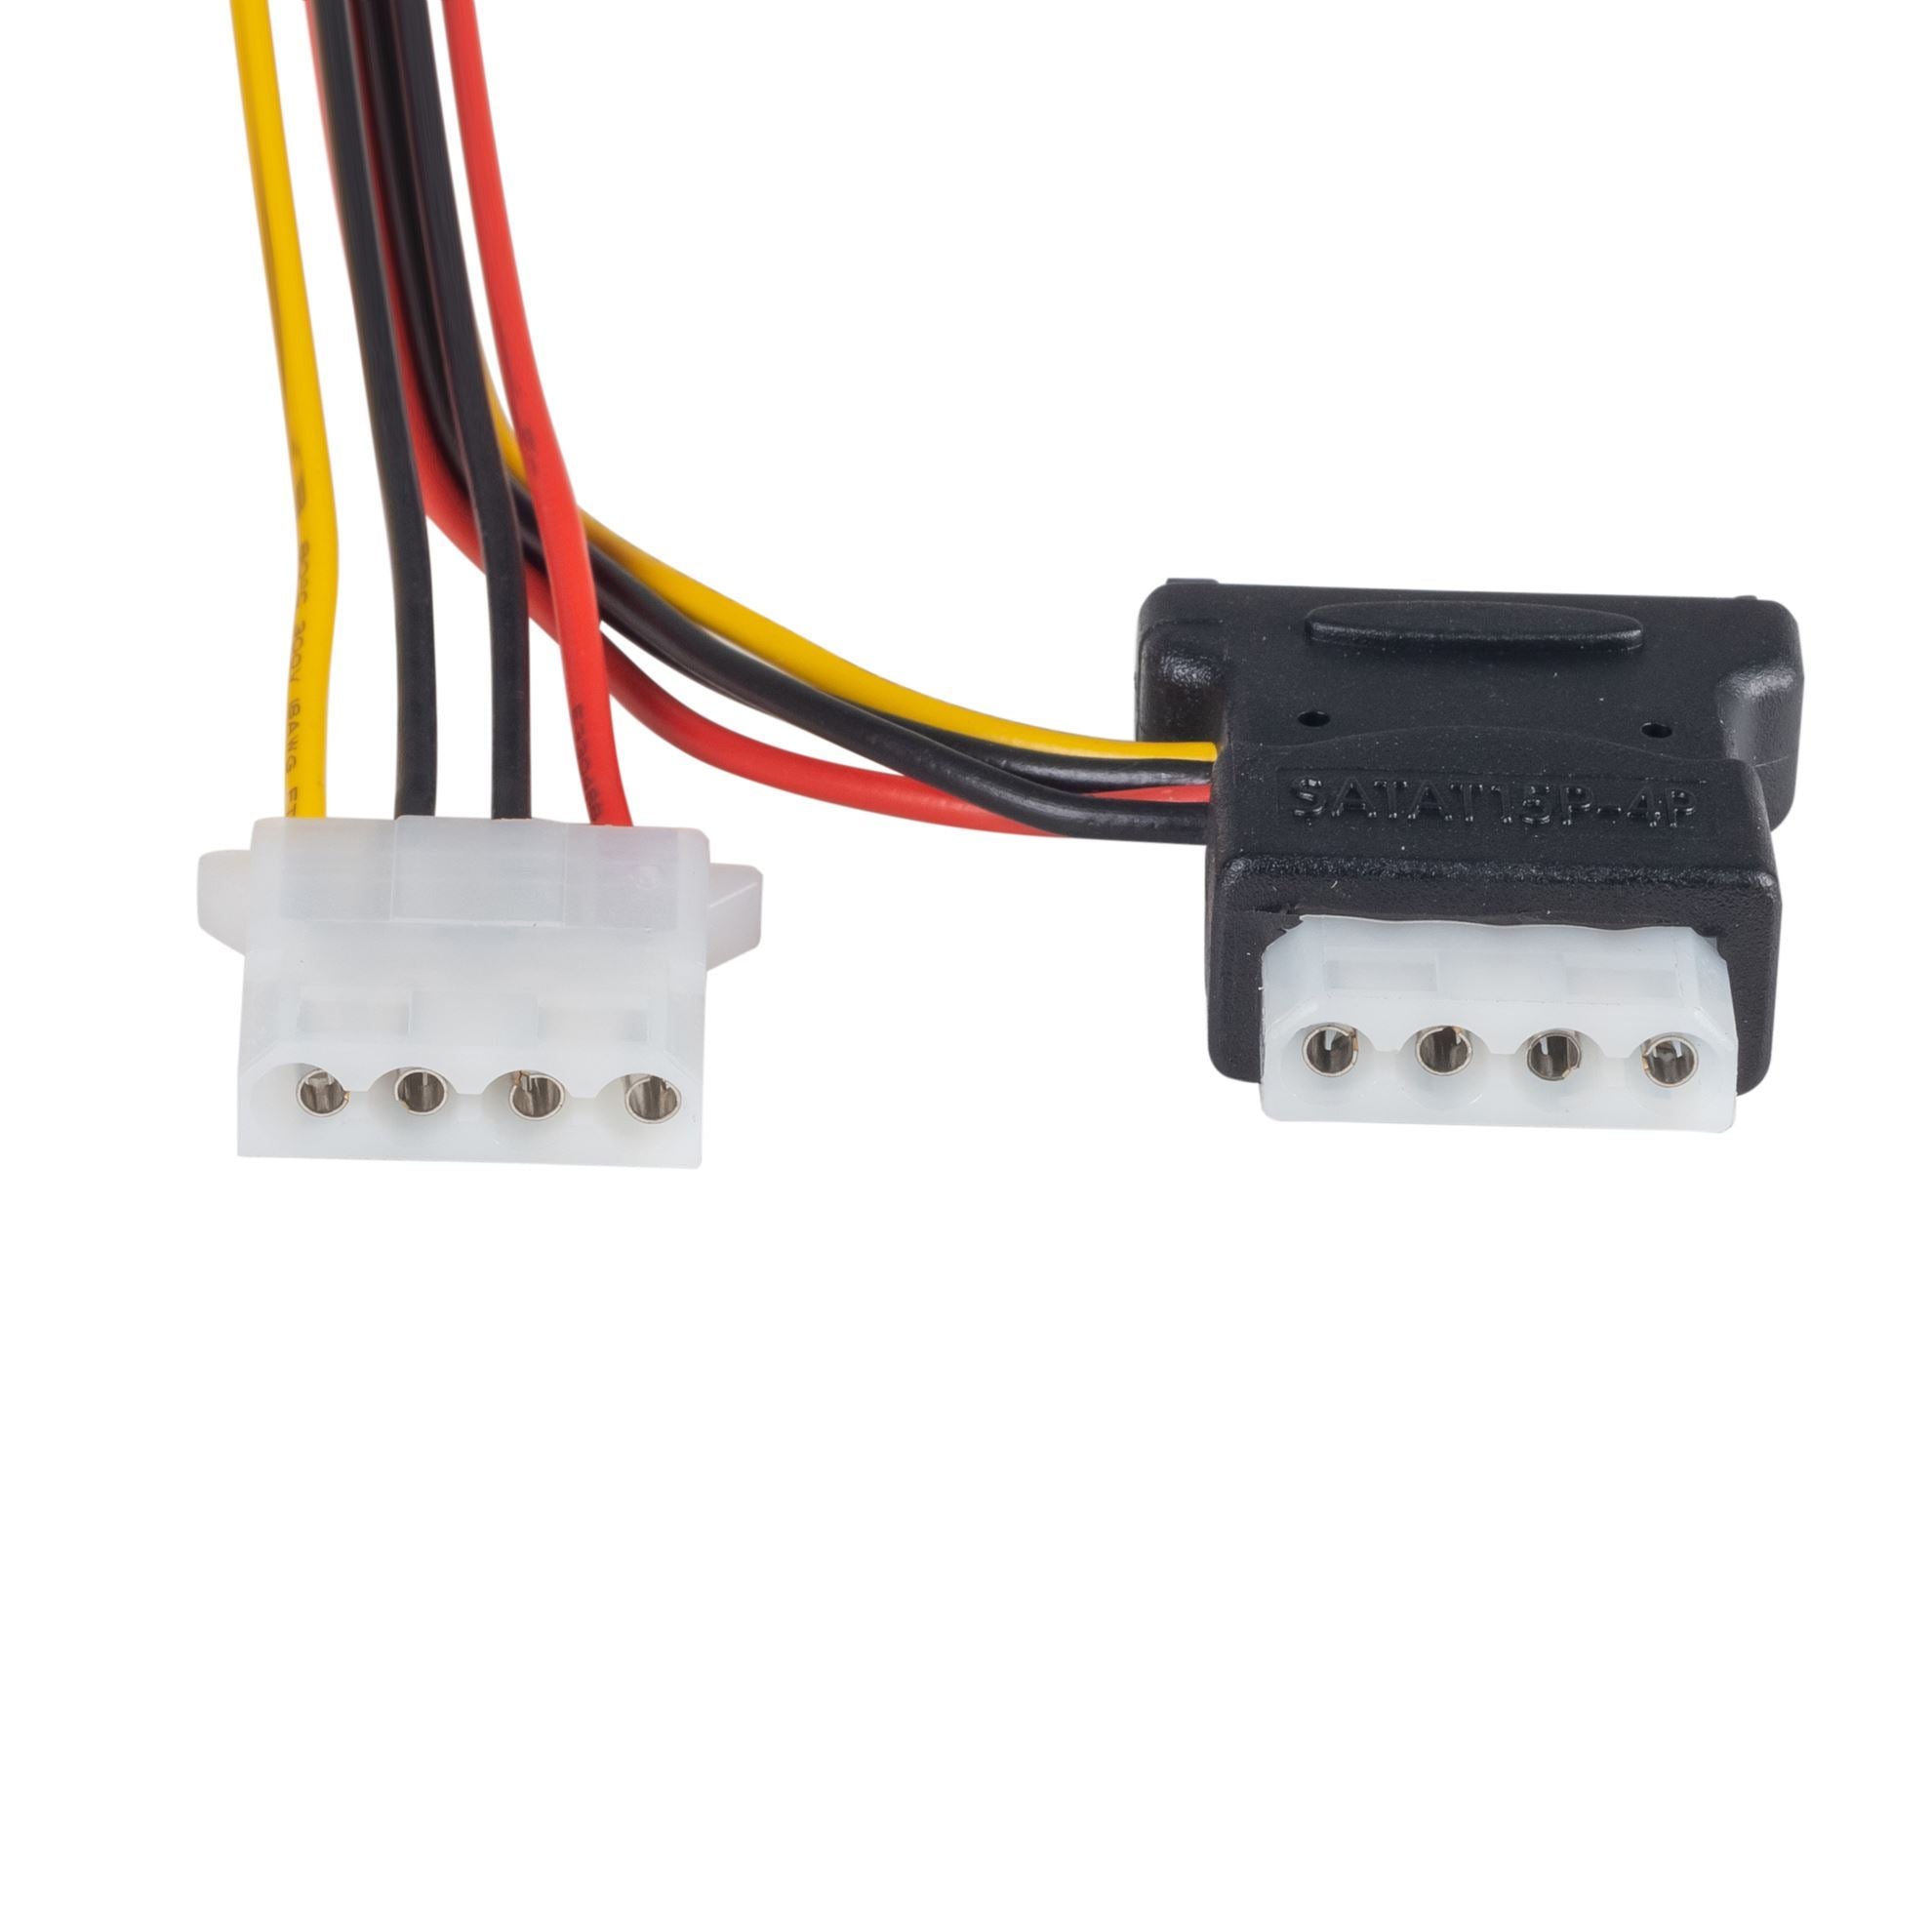 DYNAMIX_Dual_Port_Serial_ATA_Power_Splitter_Cable,_Converts_1x_SATA_15P_to_2x_standard_5.25''_power_connector. 1037